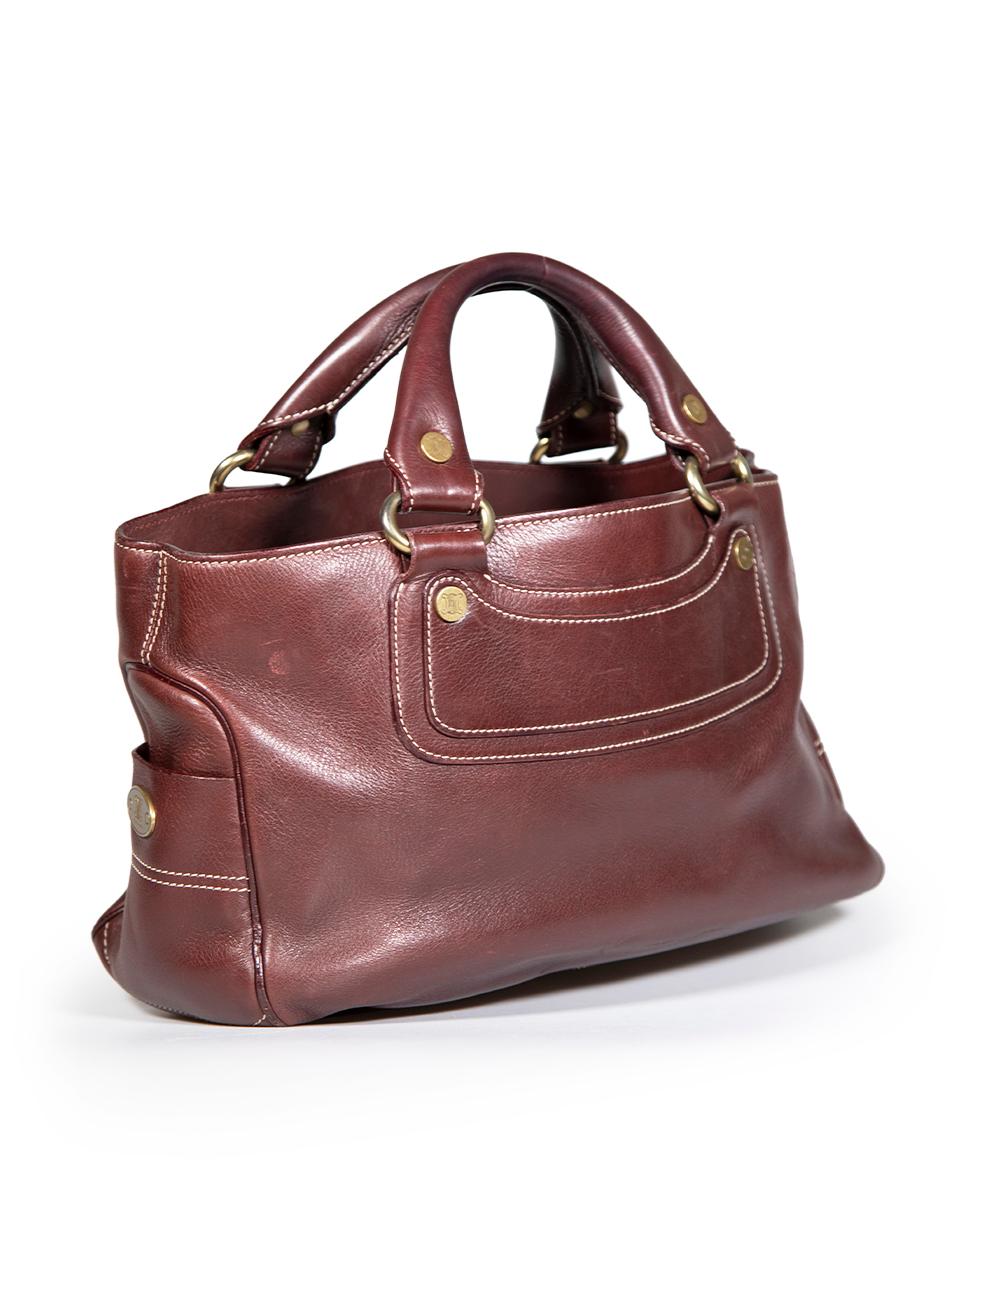 CONDITION is Good. General wear to bag is evident. Moderate signs of wear to the front, back, sides and handles with abrasions to the leather. The left side pocket trim has come away leaving the leather facings open on this used Céline designer